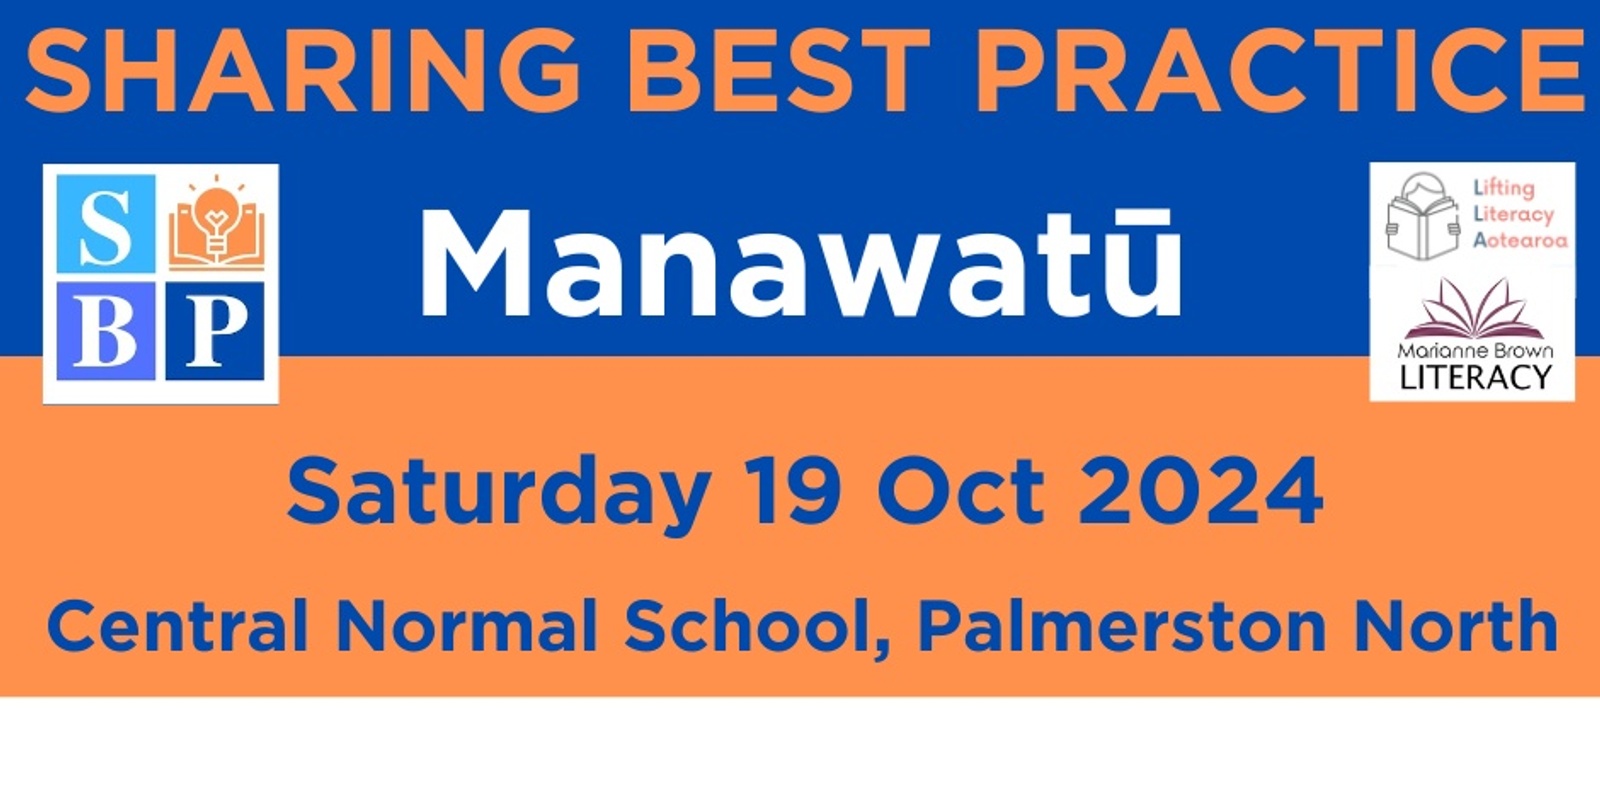 Banner image for Sharing Best Practice Manawatū 2024